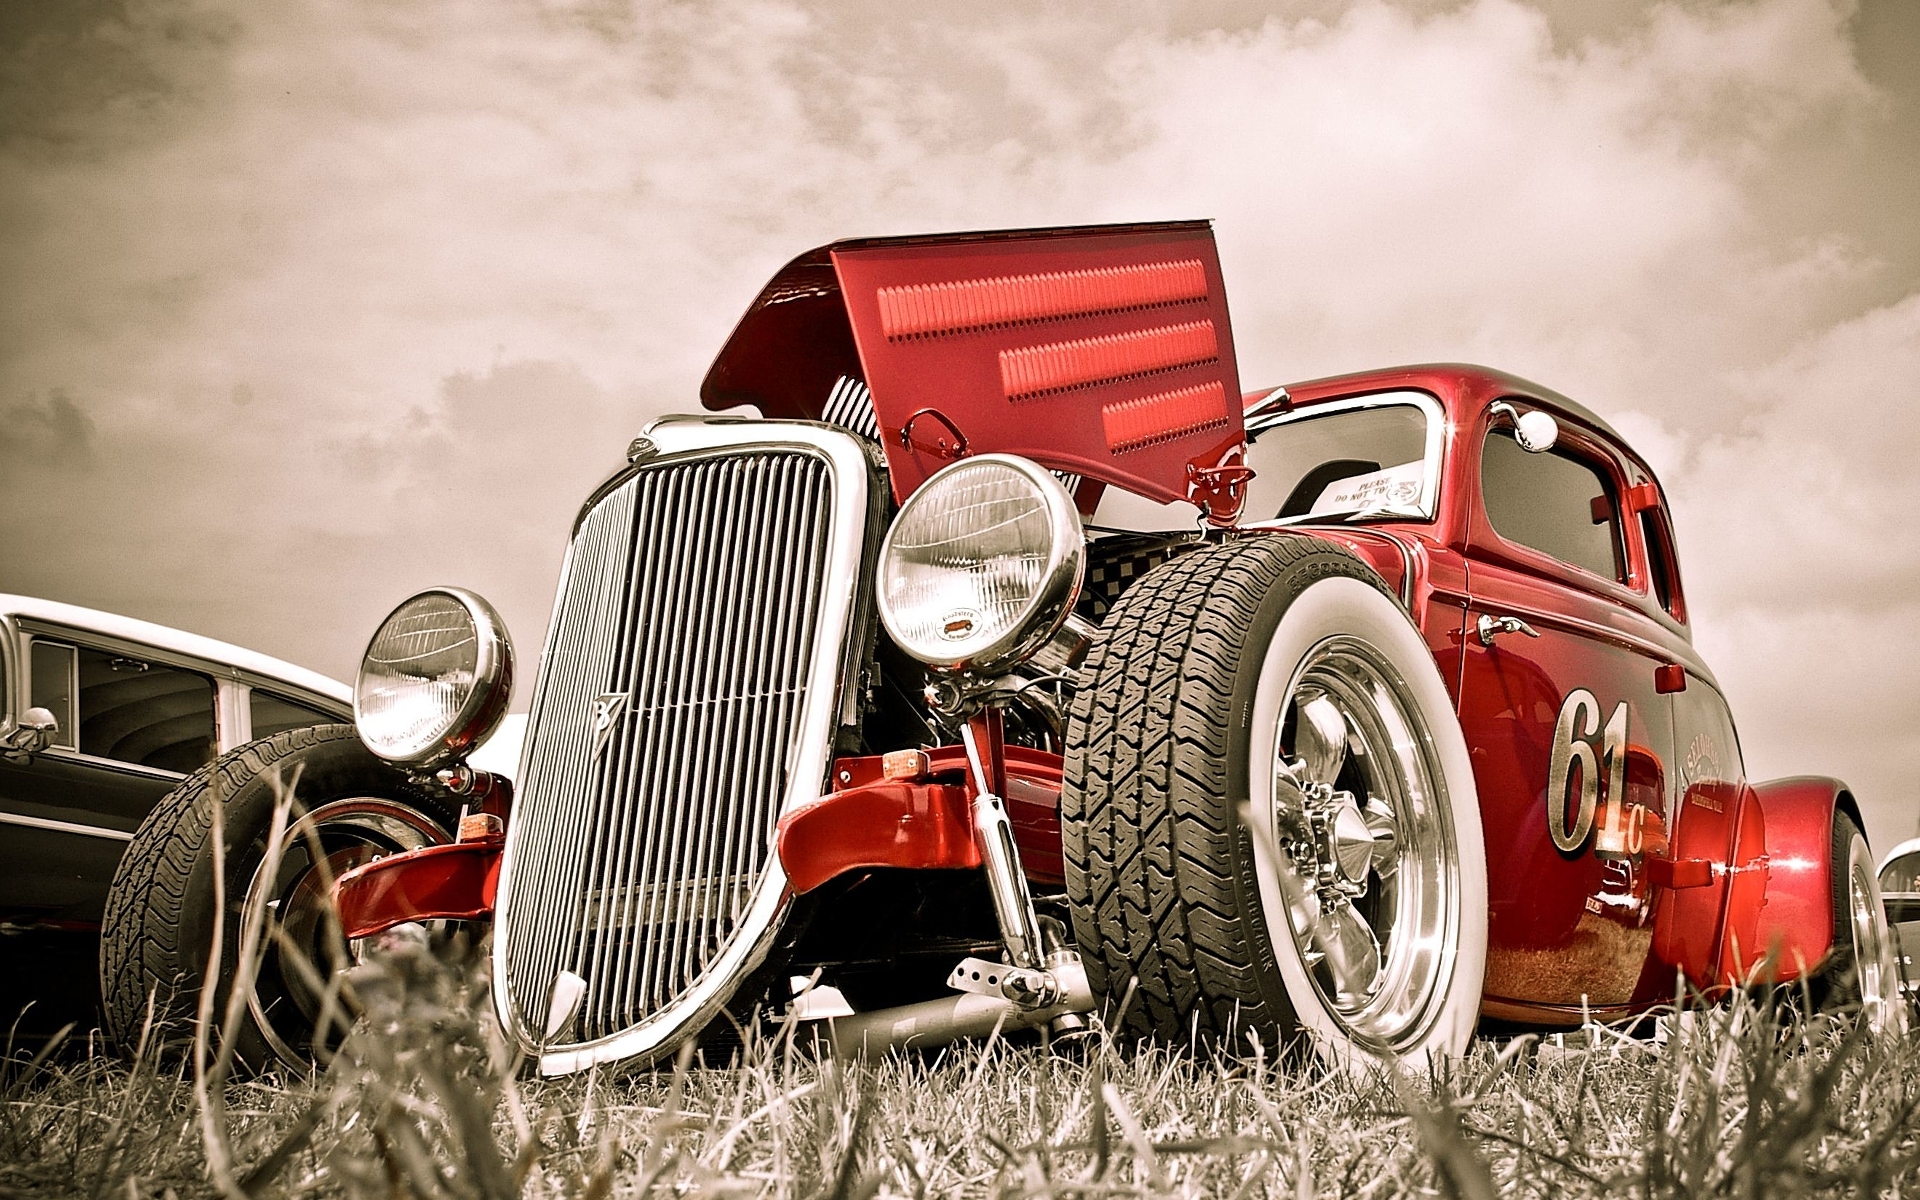 vehicles, Cars, Auto, Hdr, Hot, Rod, Rat, Classic, Retro, Old, Stance, Candy, Chrome, Wheels, Grill, Lights, Sky, Clouds Wallpaper